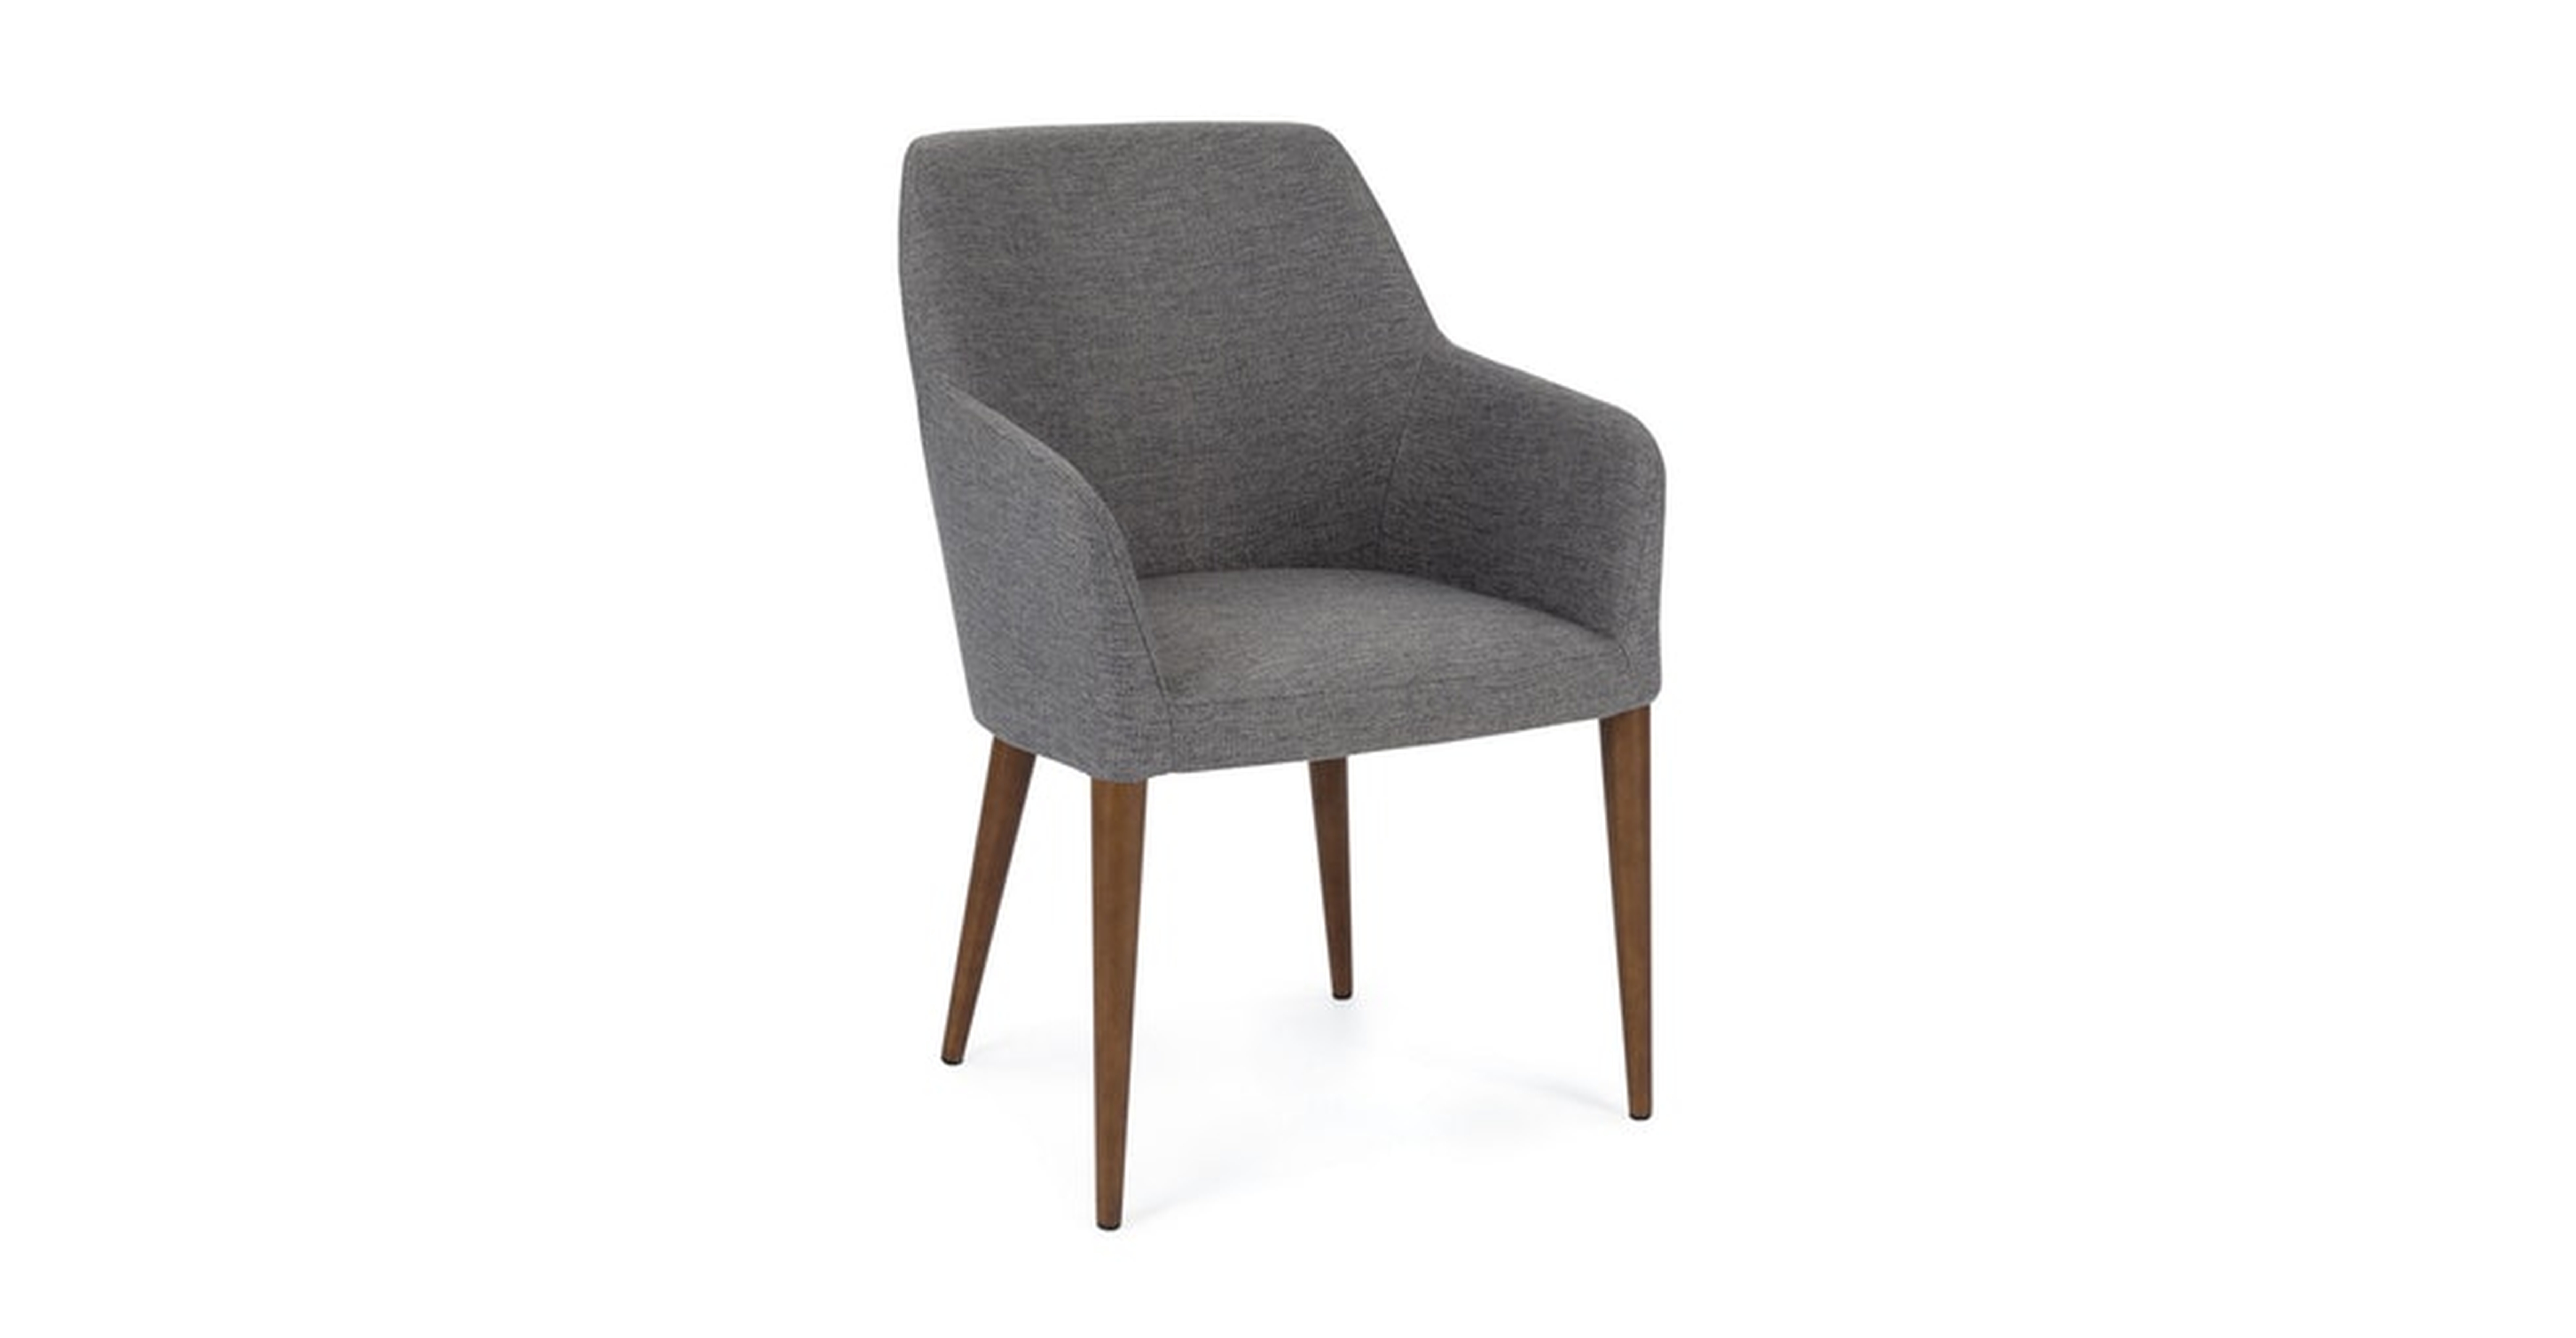 Feast Gravel Gray Dining Chair, pair - Article